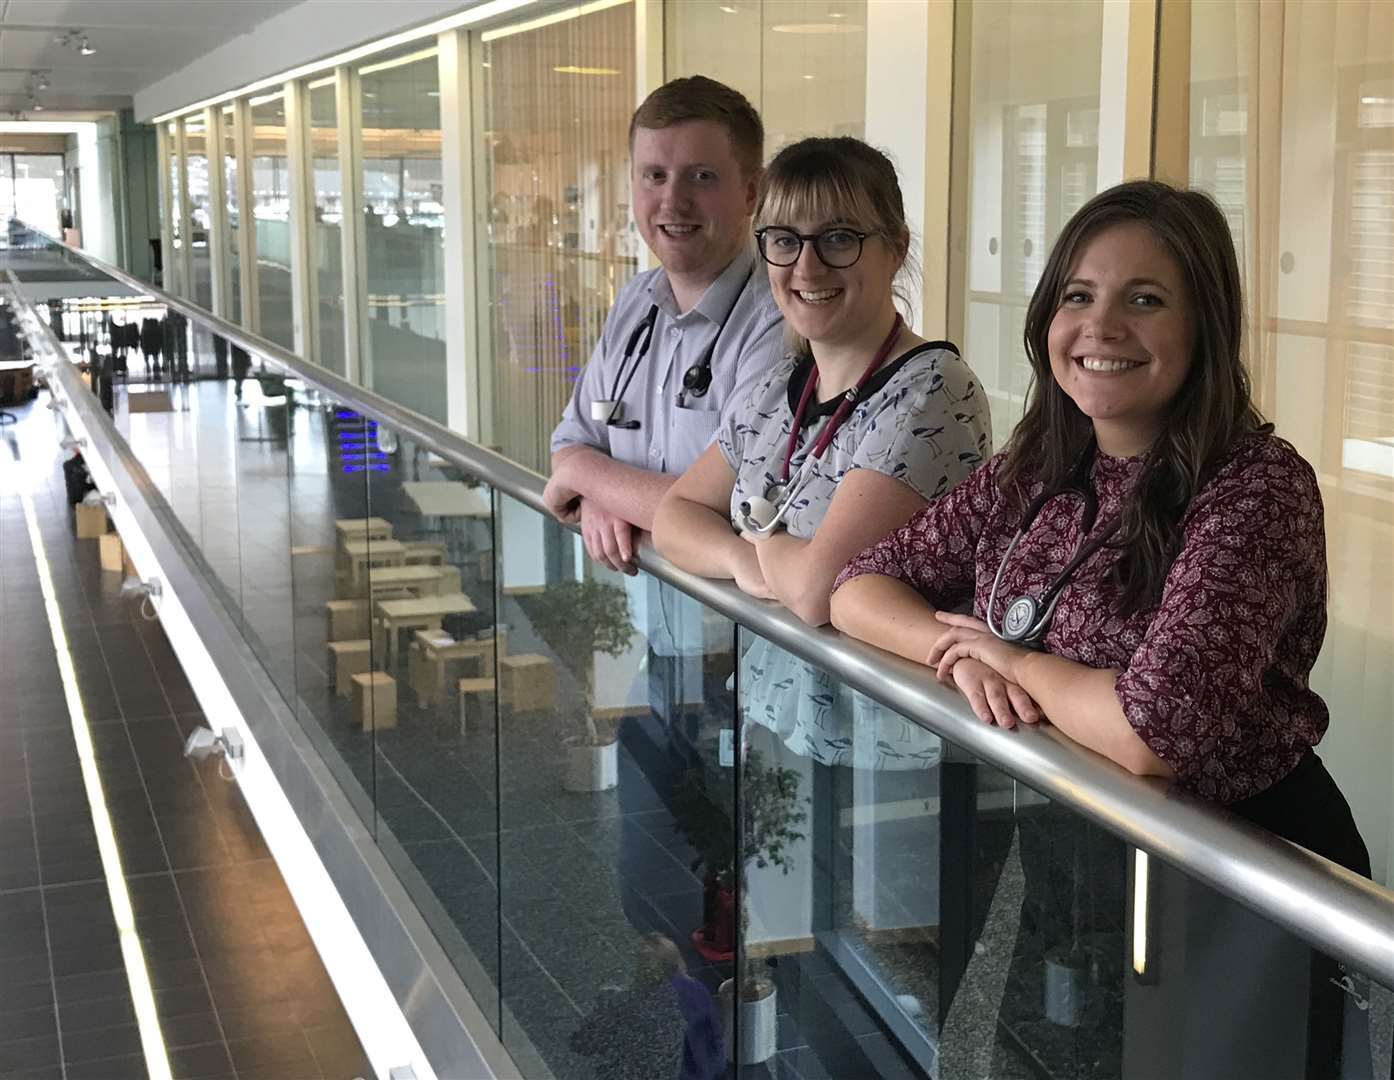 Physician associate students (from left) Liam Allan, Katya MacKenzie and Frances Seahafer.